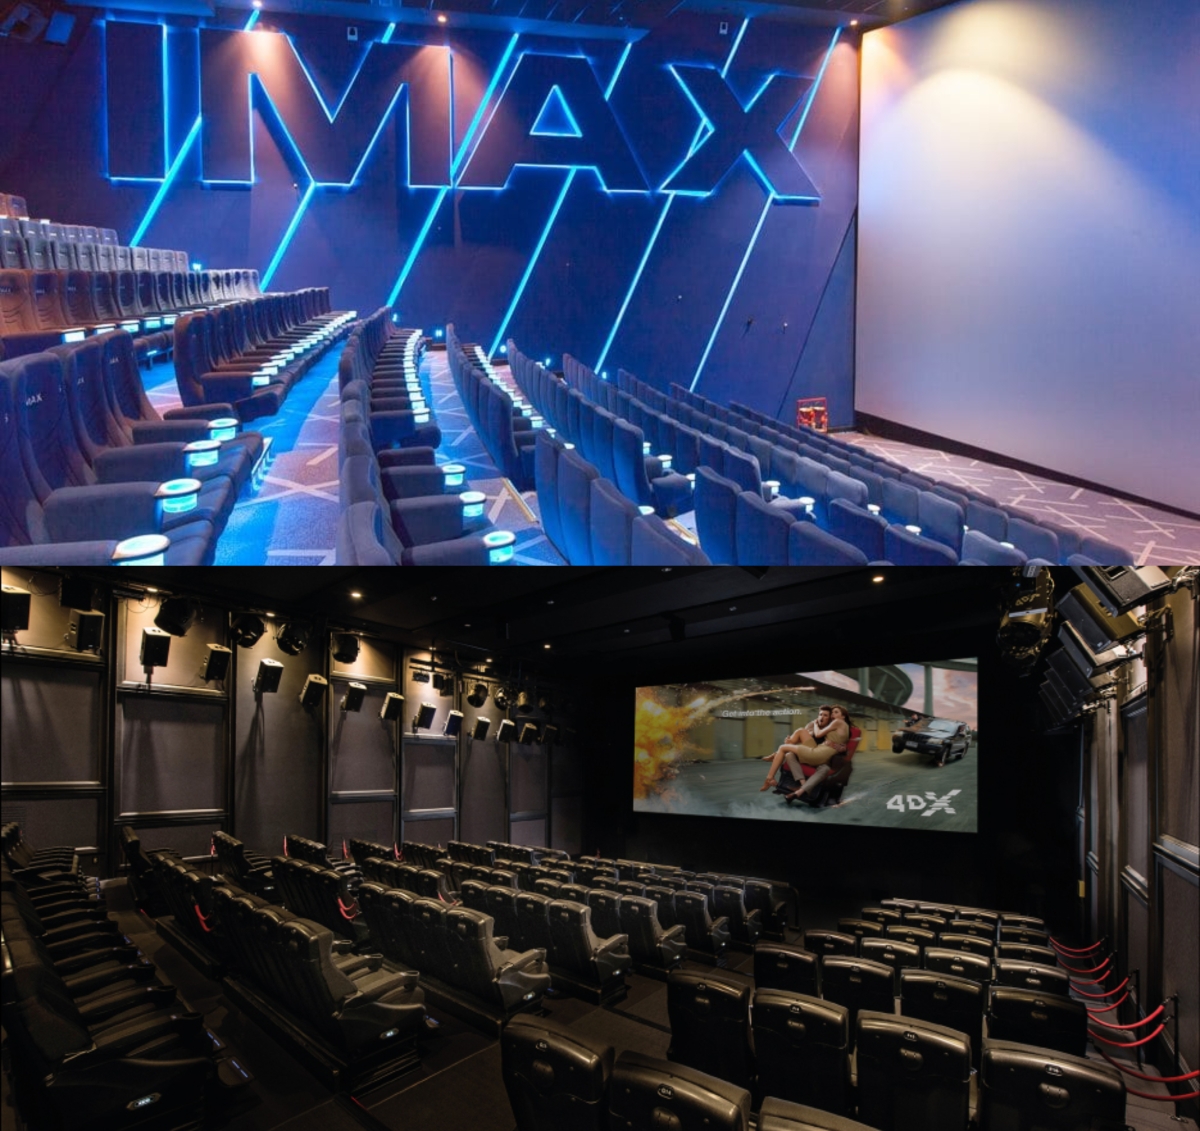 Is IMAX 3D better than 4DX?